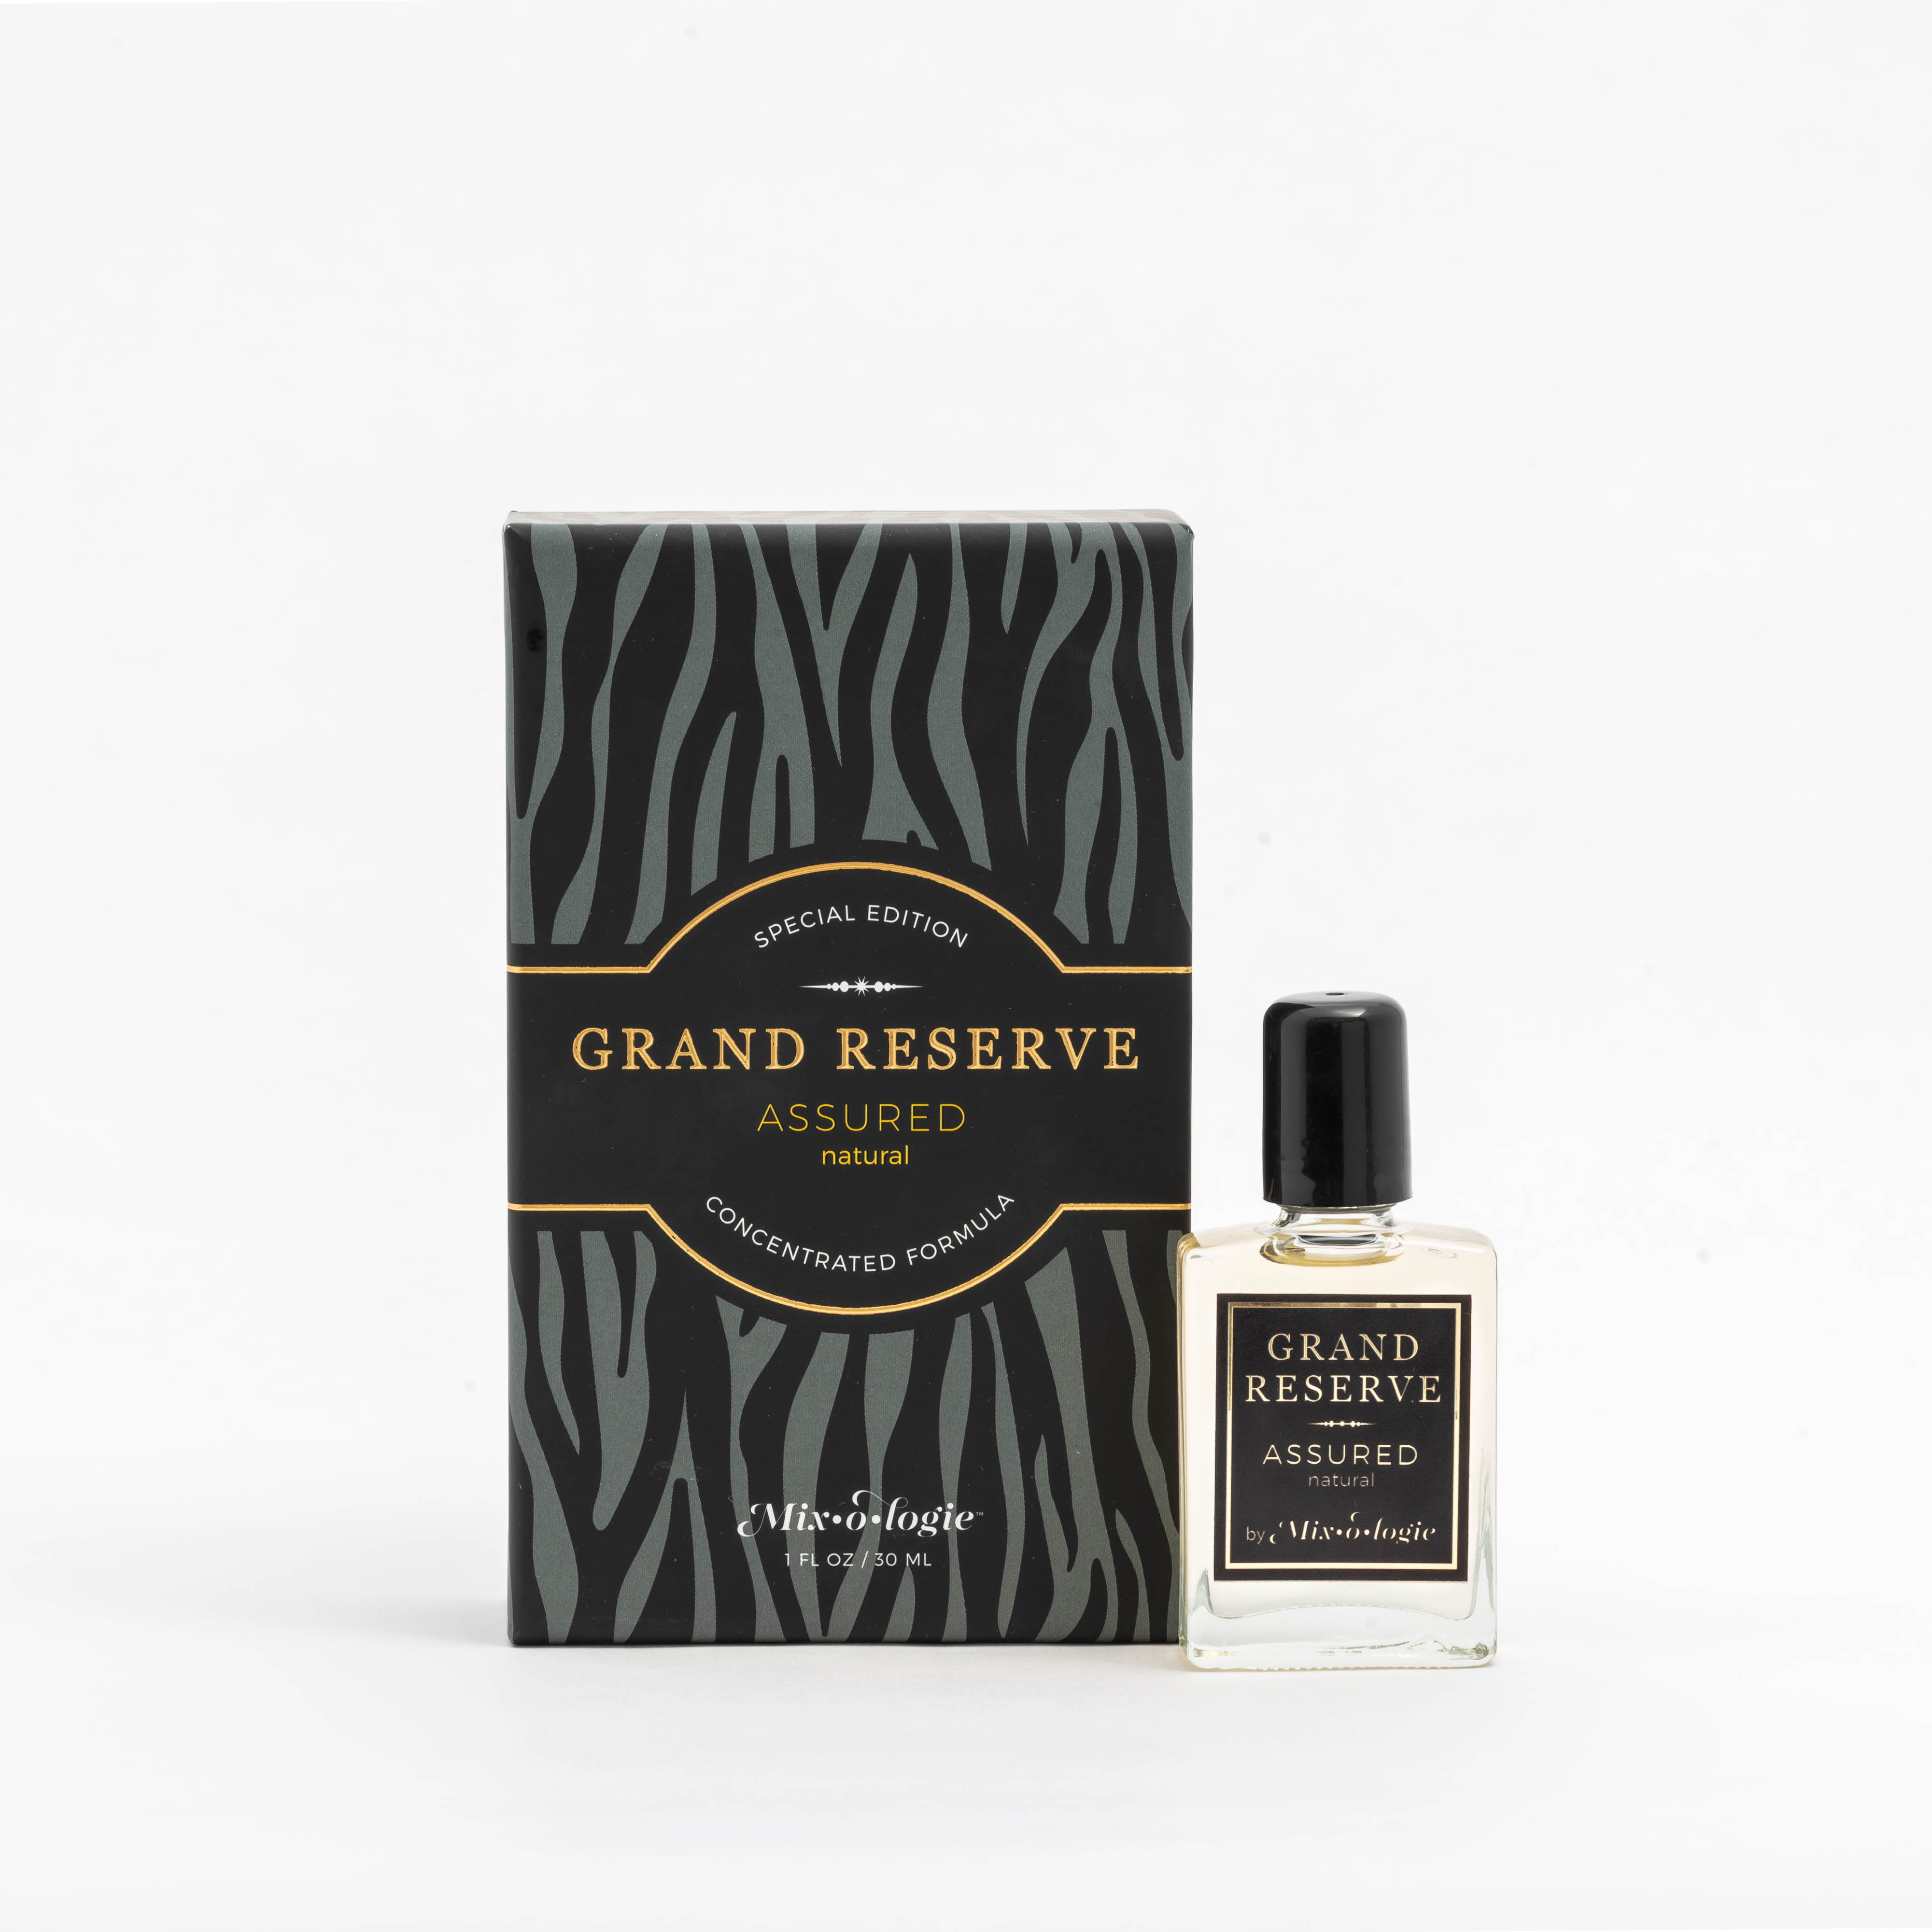 Grand reserve concentrated formula of Assured (natural) scented rollerball in glass 30 ML bottle.